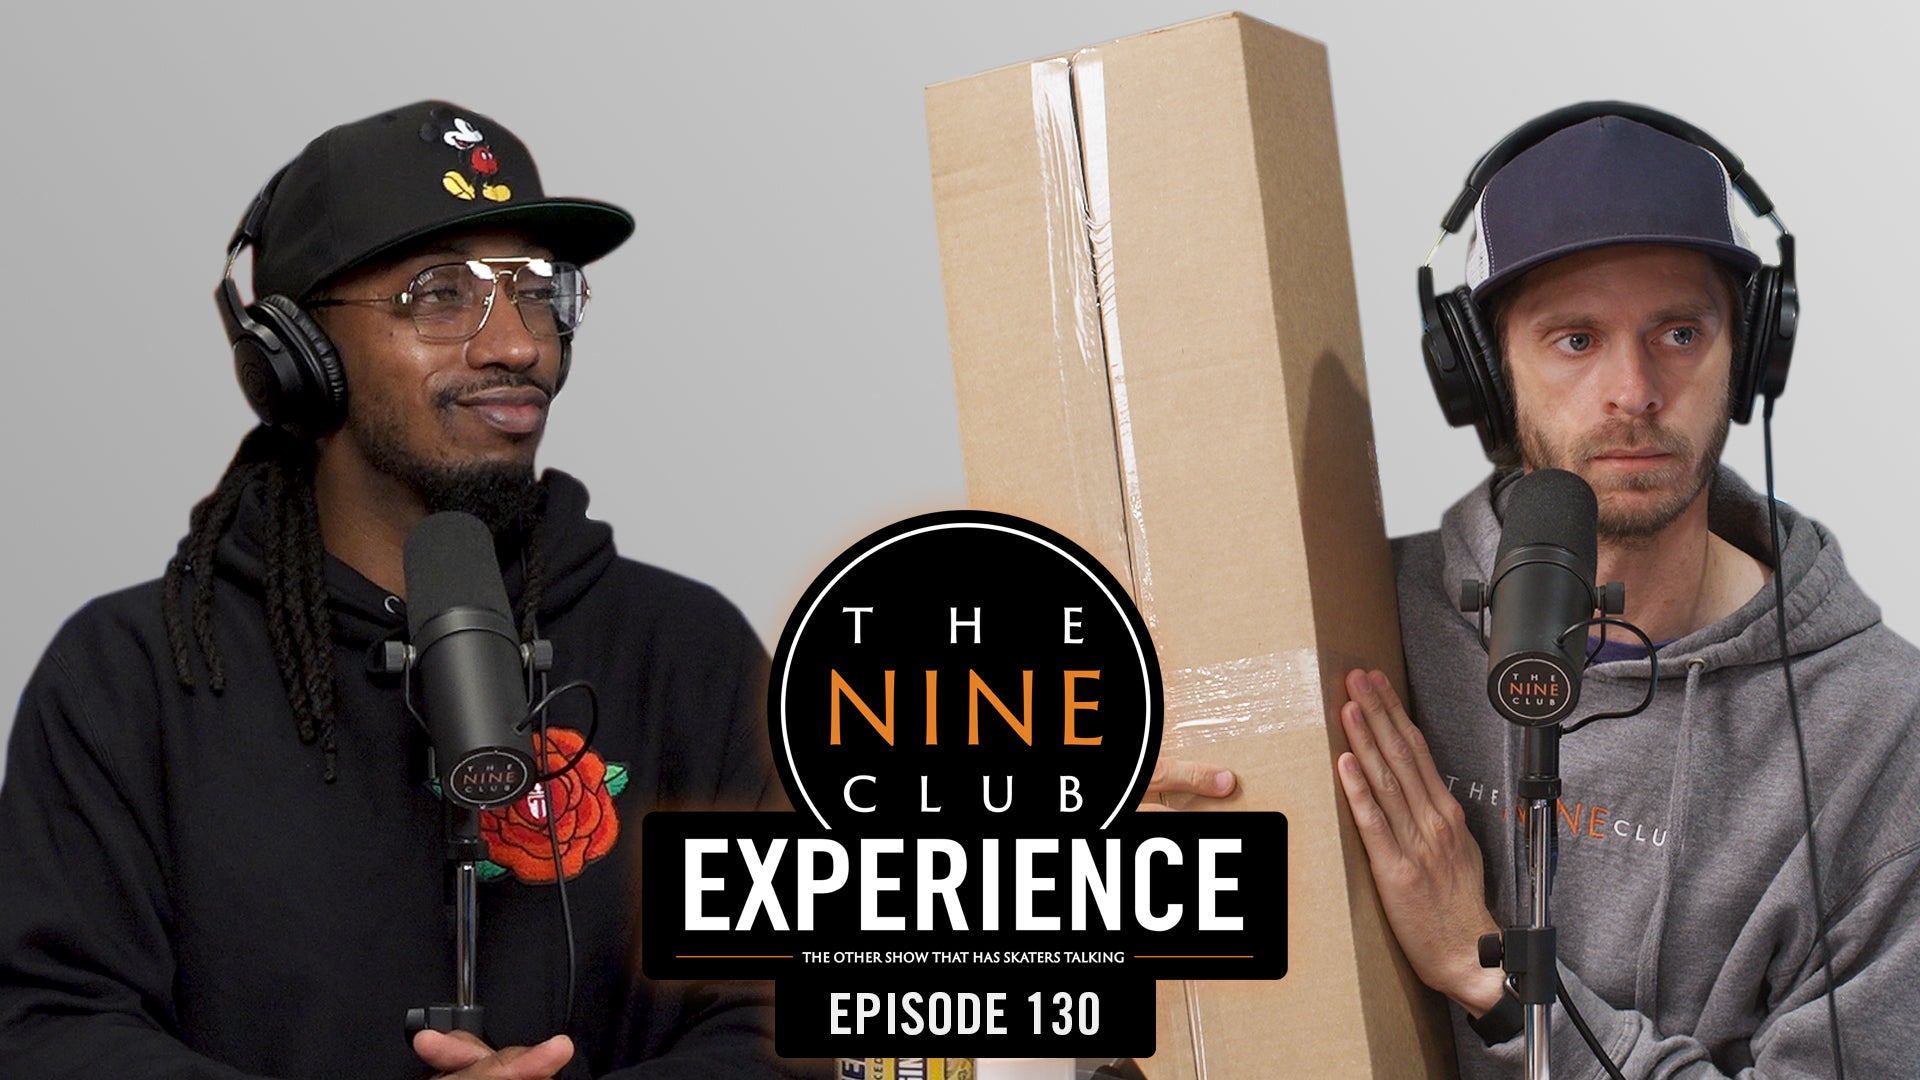 The Nine Club Experience Episode 130